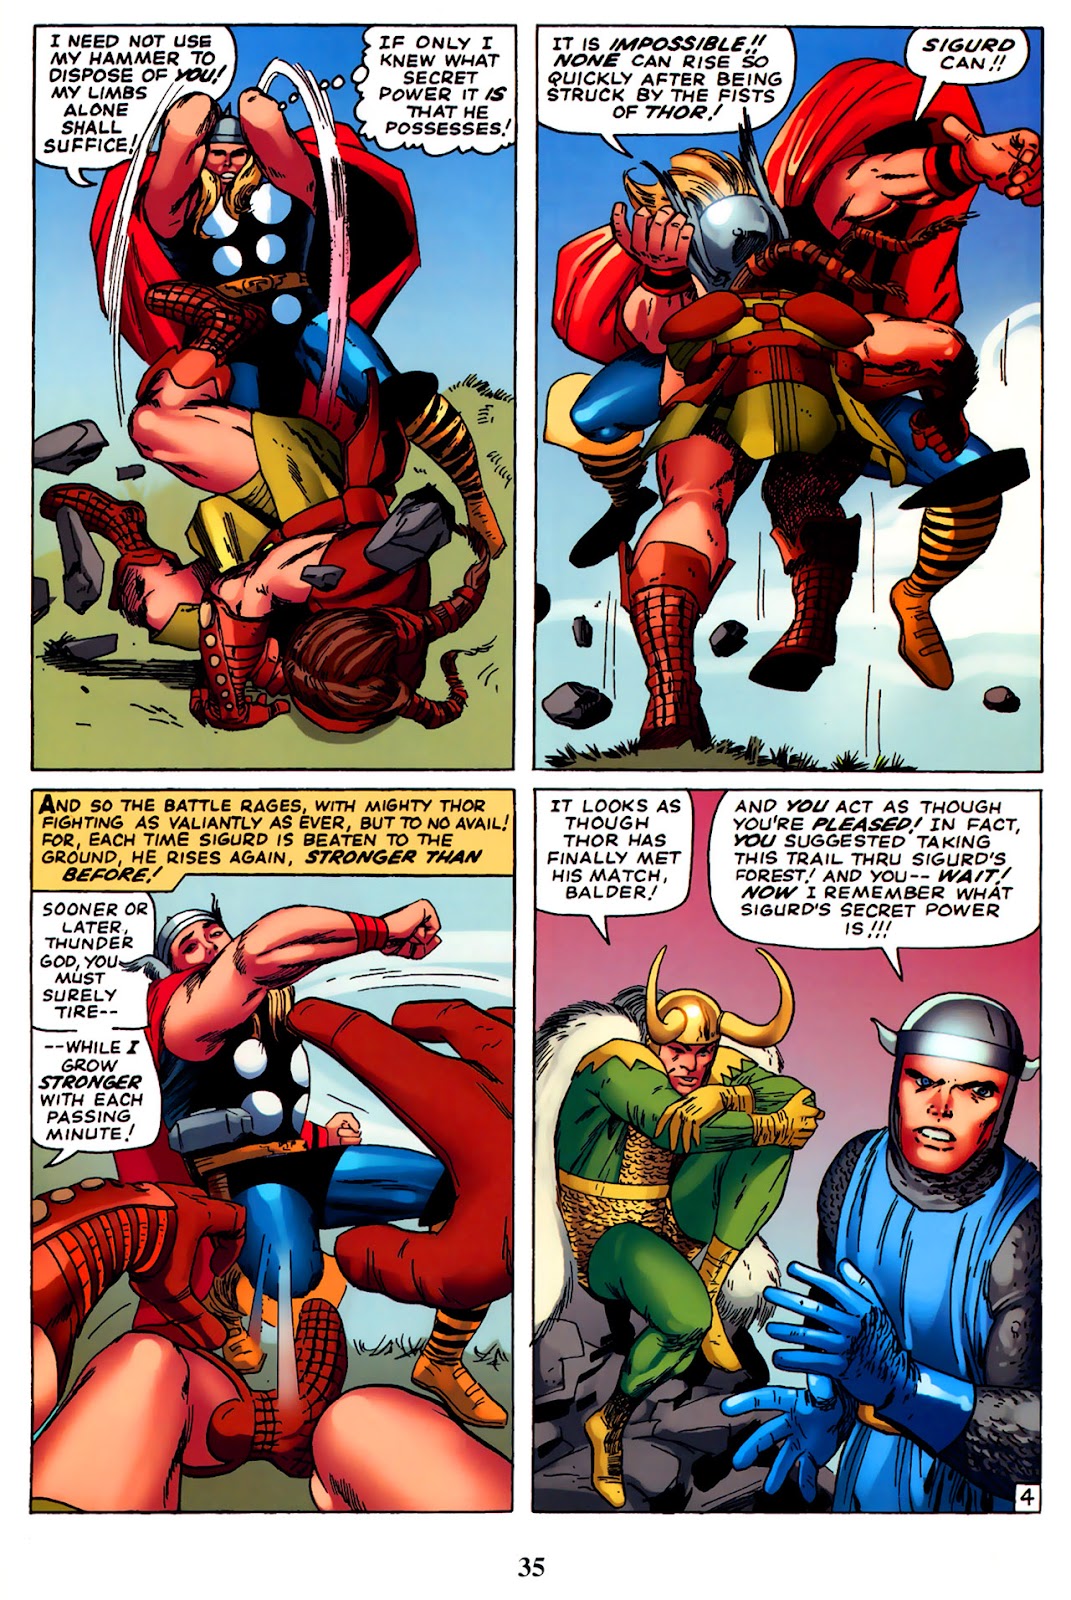 Thor: Tales of Asgard by Stan Lee & Jack Kirby issue 2 - Page 37